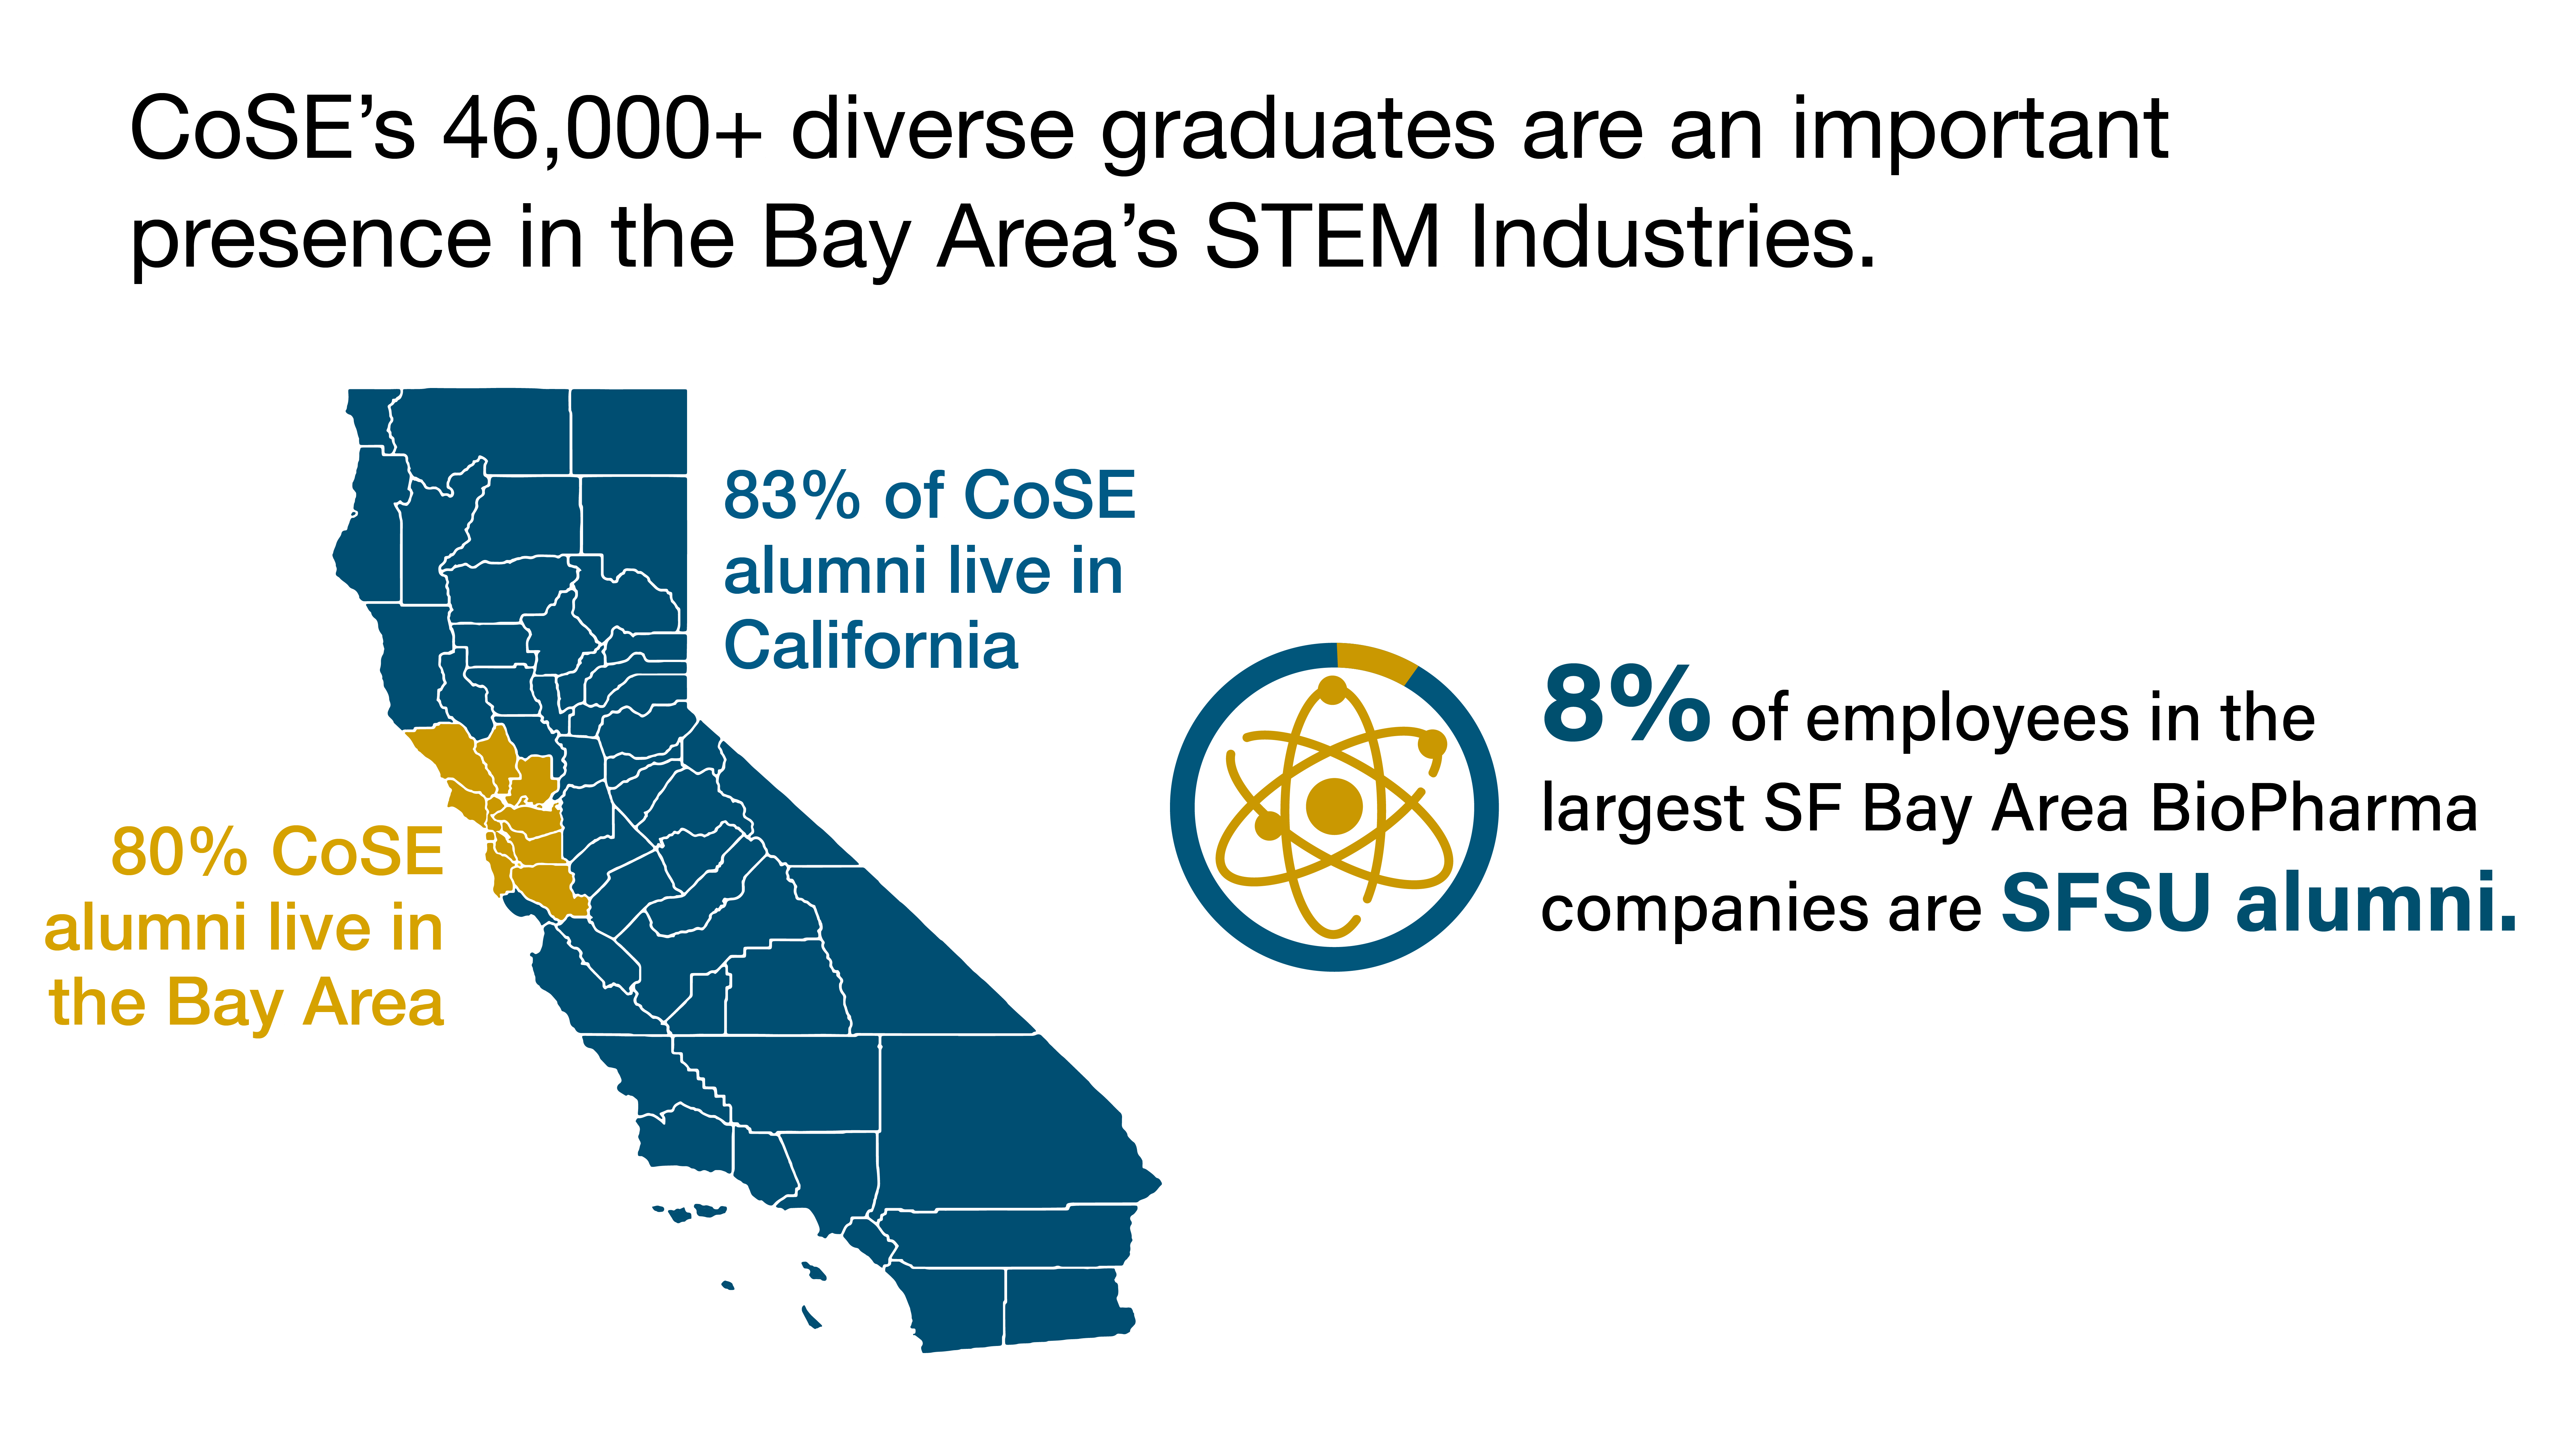 Infographic showing percentages of alumni that live in CA